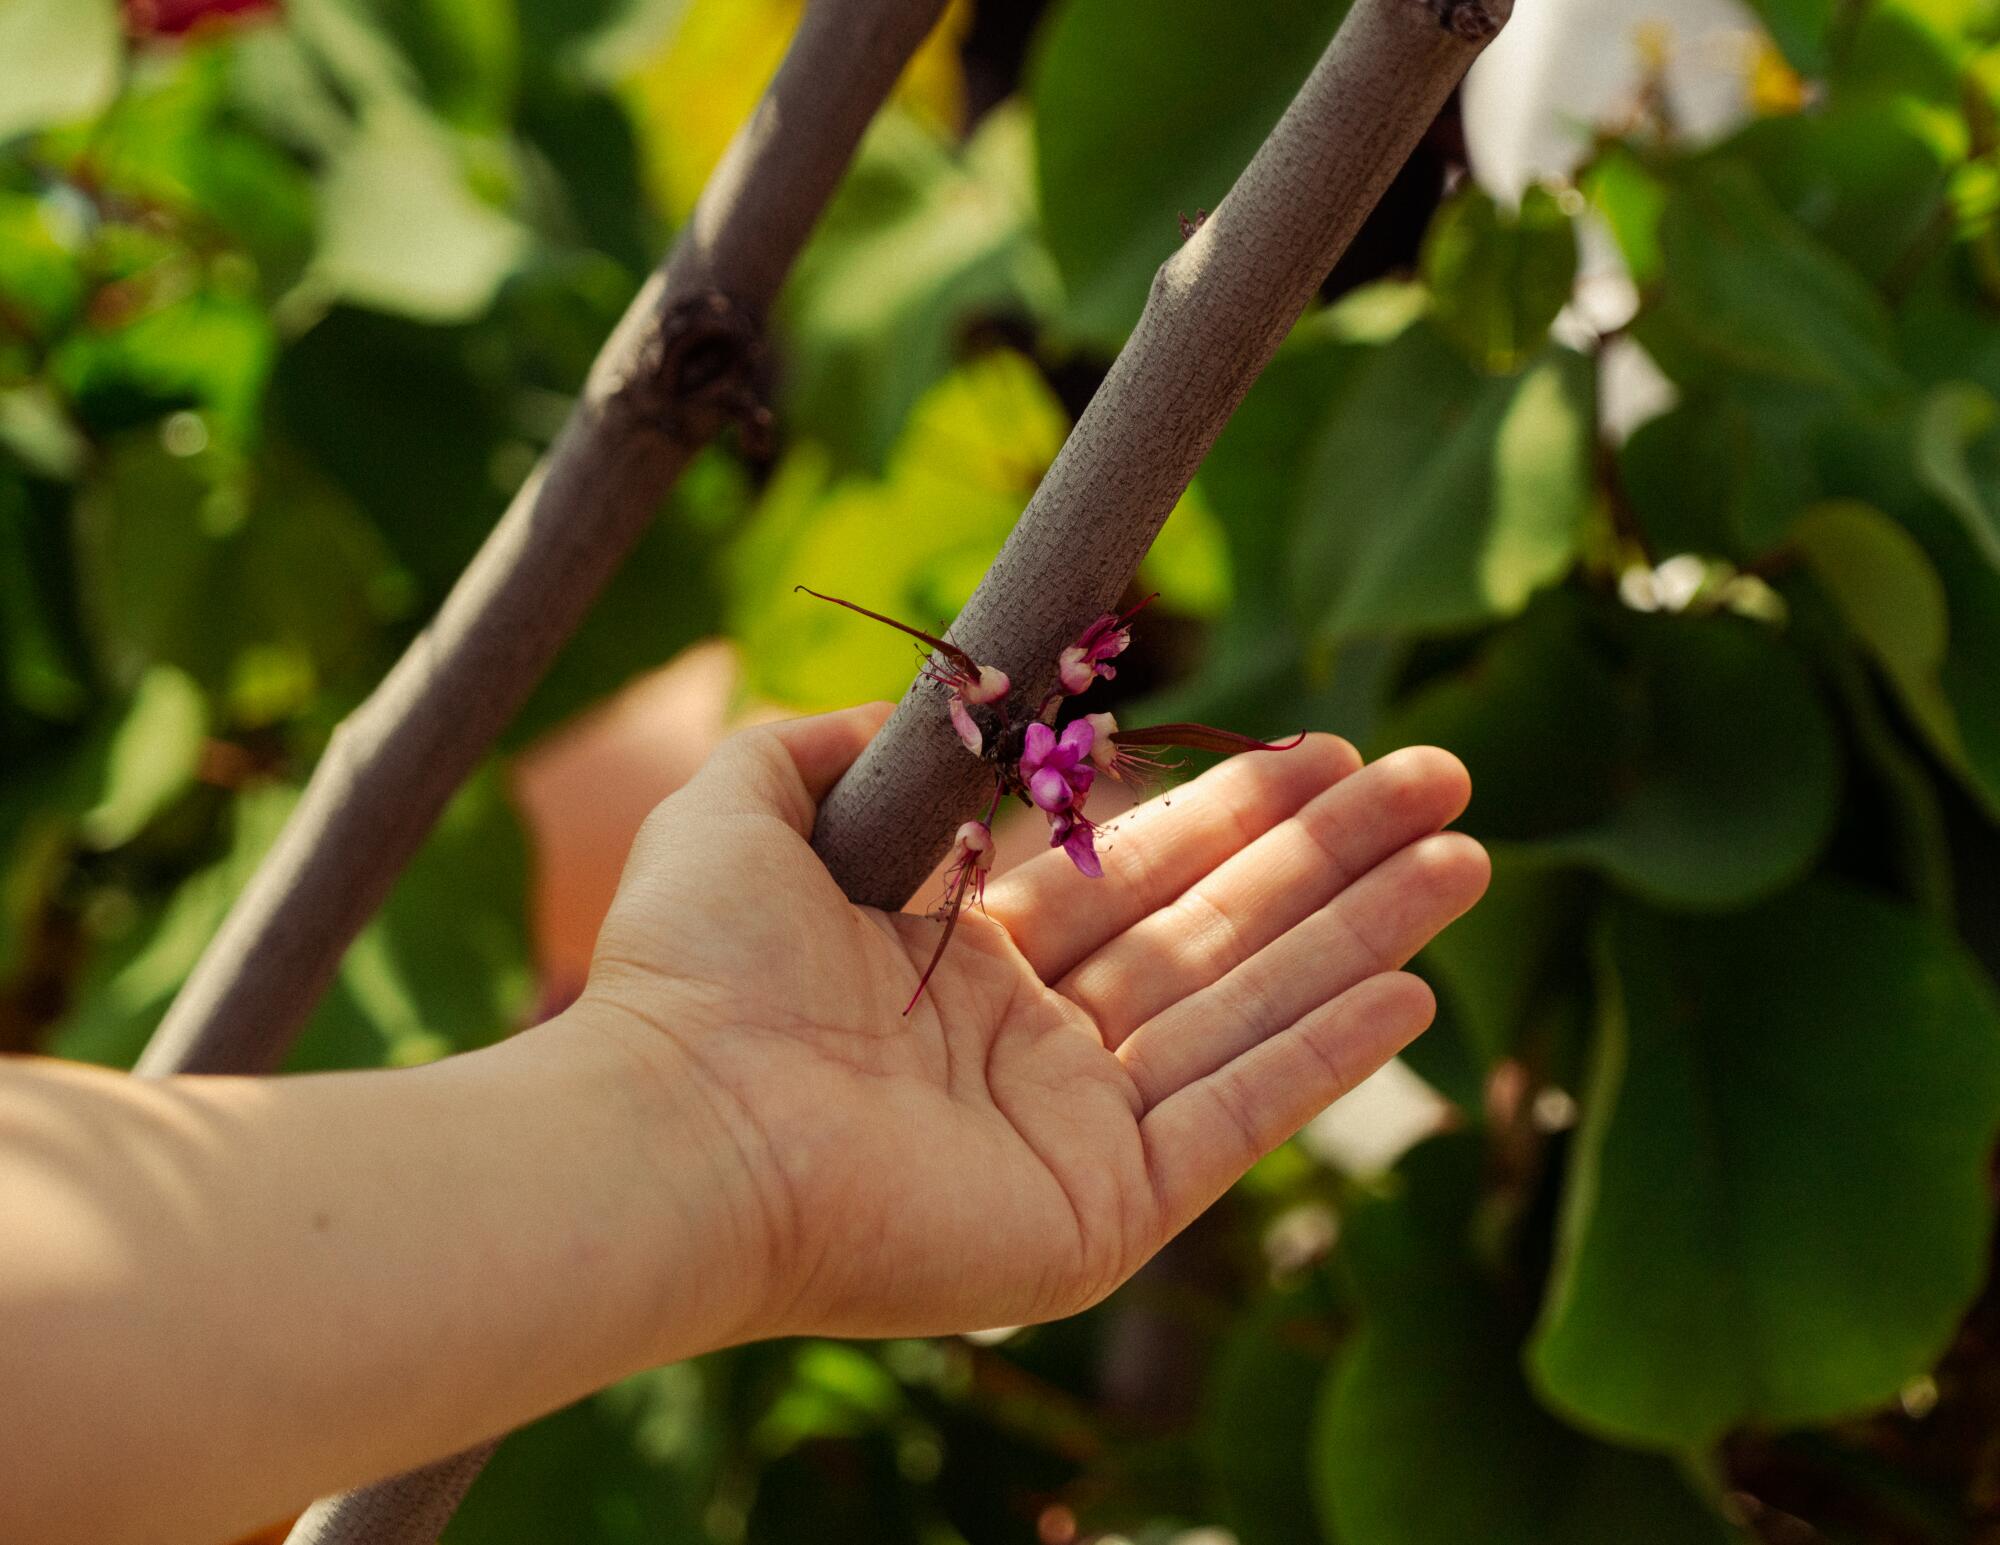 A hand caressing pink flower buds on a branch.